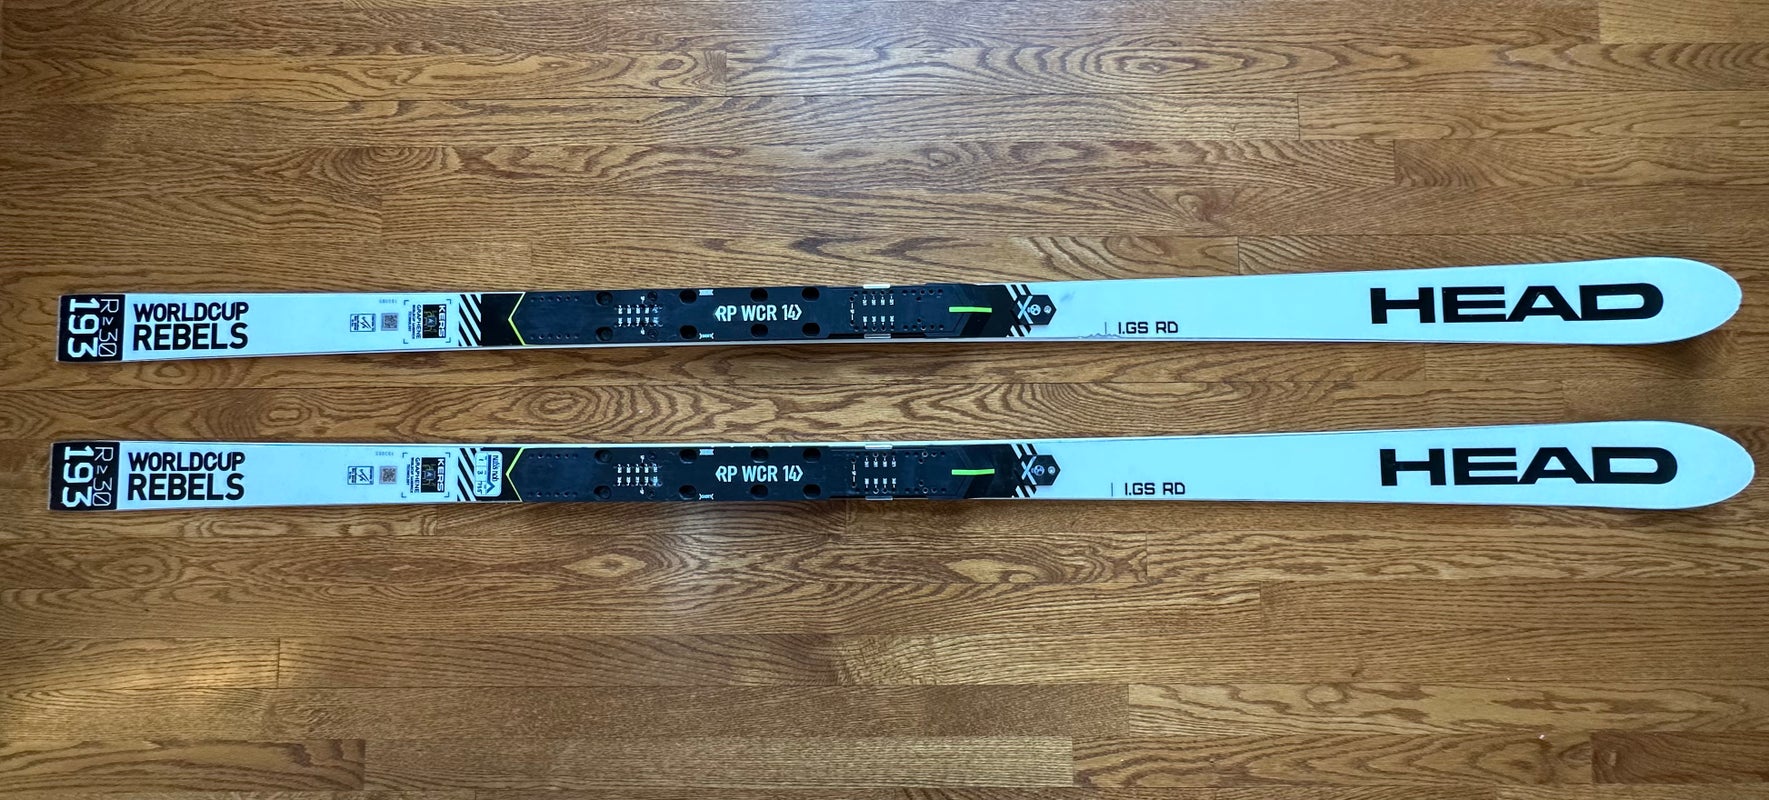 2020 Head WCR i.GS RD FIS Skis - 193cm 30m WITH BINDINGS